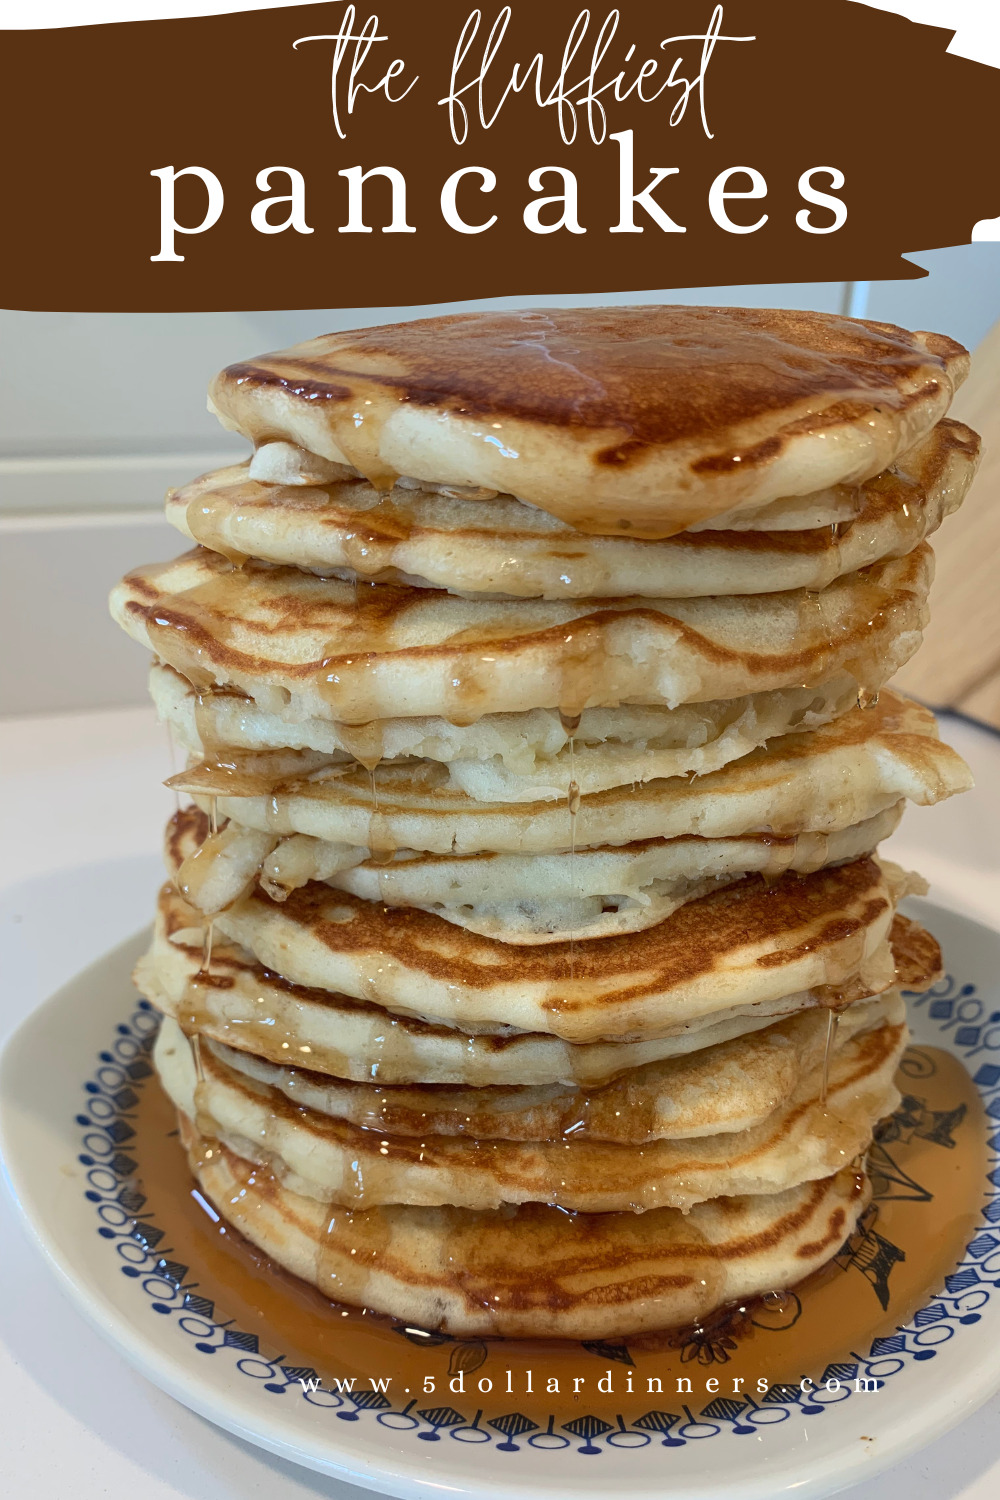 Amazon.com : Gamesa Mexican Hot Cakes Pancake Mix. Wheat flour prepared and  fortified to cook delicious and fluffy hot cakes. 1 bag (800grs) : Grocery  & Gourmet Food